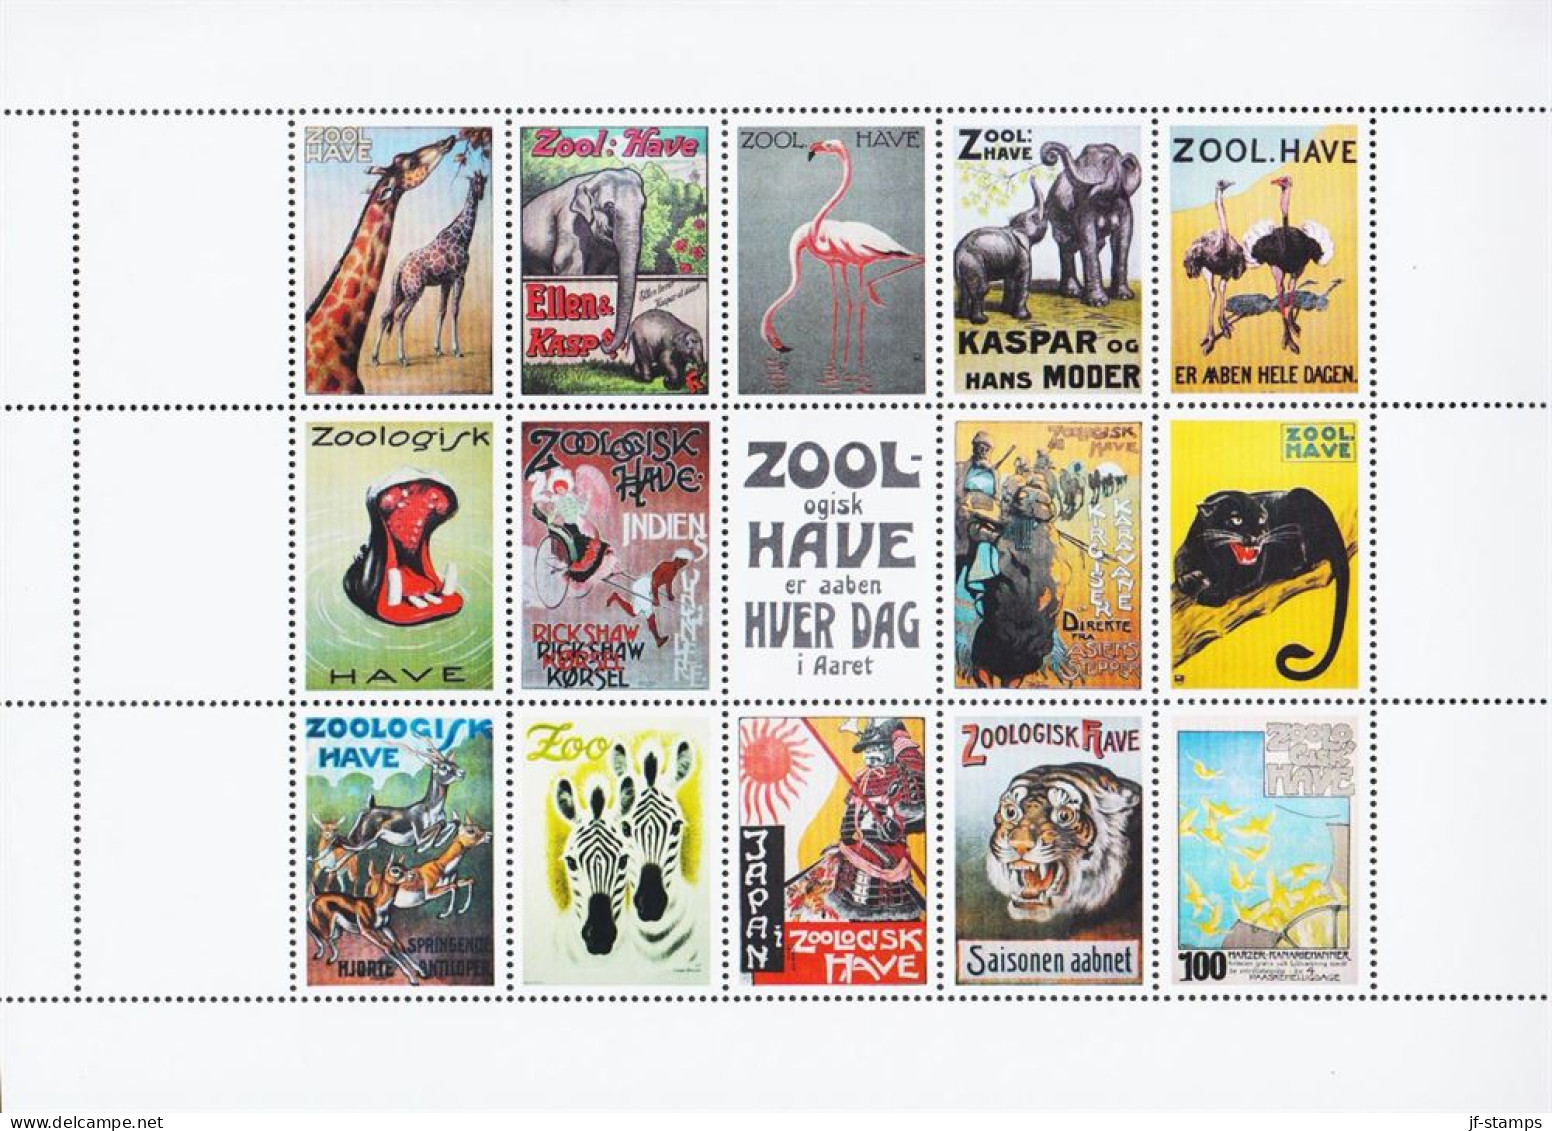 2009. DANMARK. ZOOLOGISK HAVE Sheet With A Selection Of 15 Posters In Stamp Size Never Hinged. Beautiful M... - JF544442 - Ongebruikt